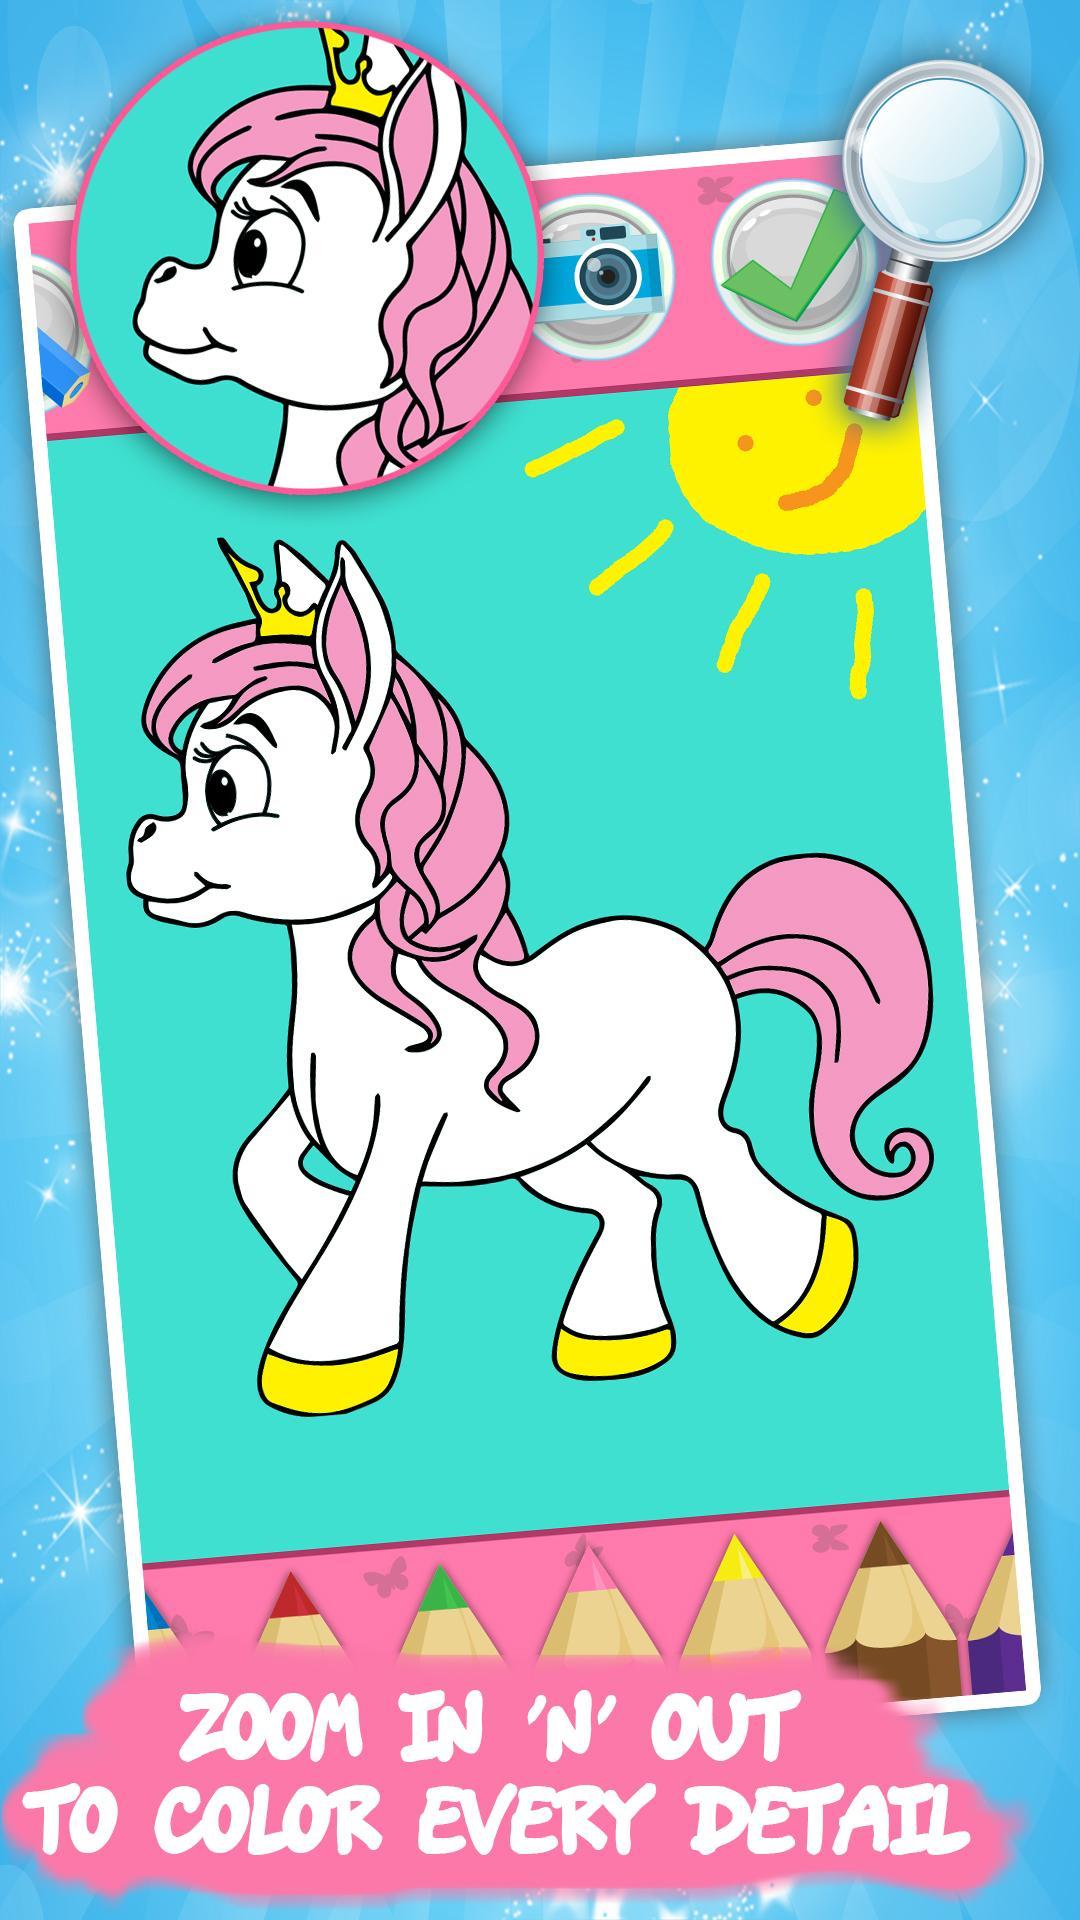 Unicorn coloring book for kids for Android - APK Download